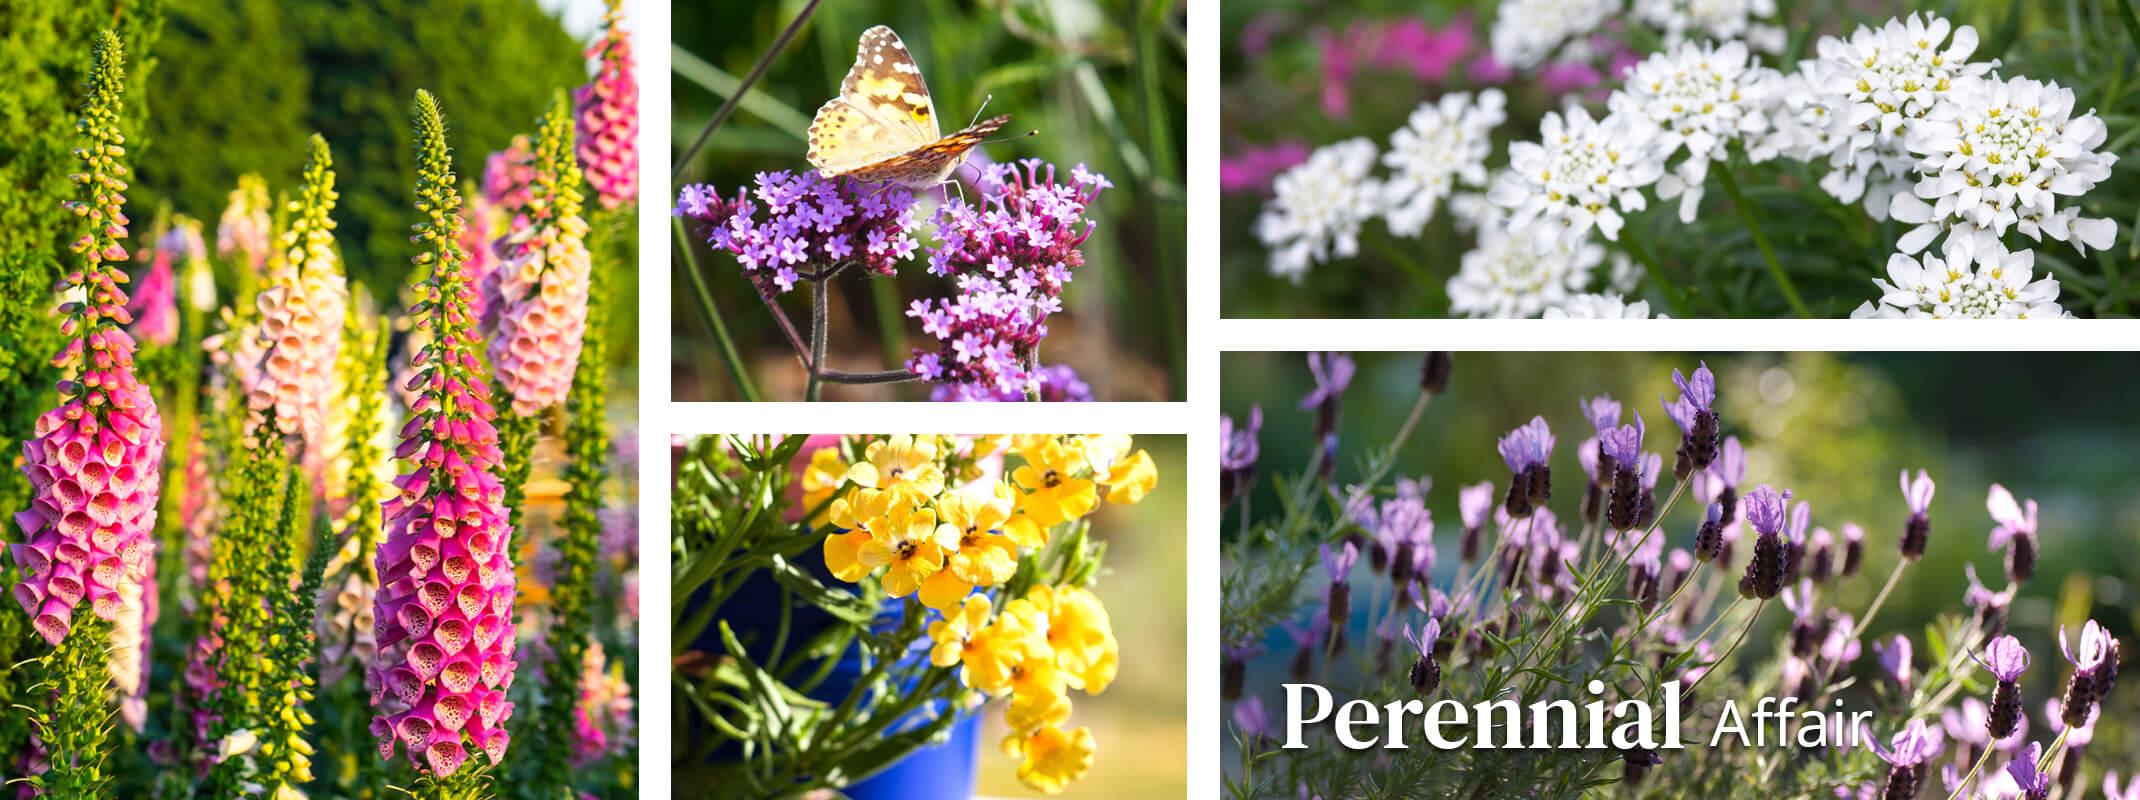 Perennials that include digitalis, verbena, nemesia, iberis and spanish lavender with the words that say perennial affair